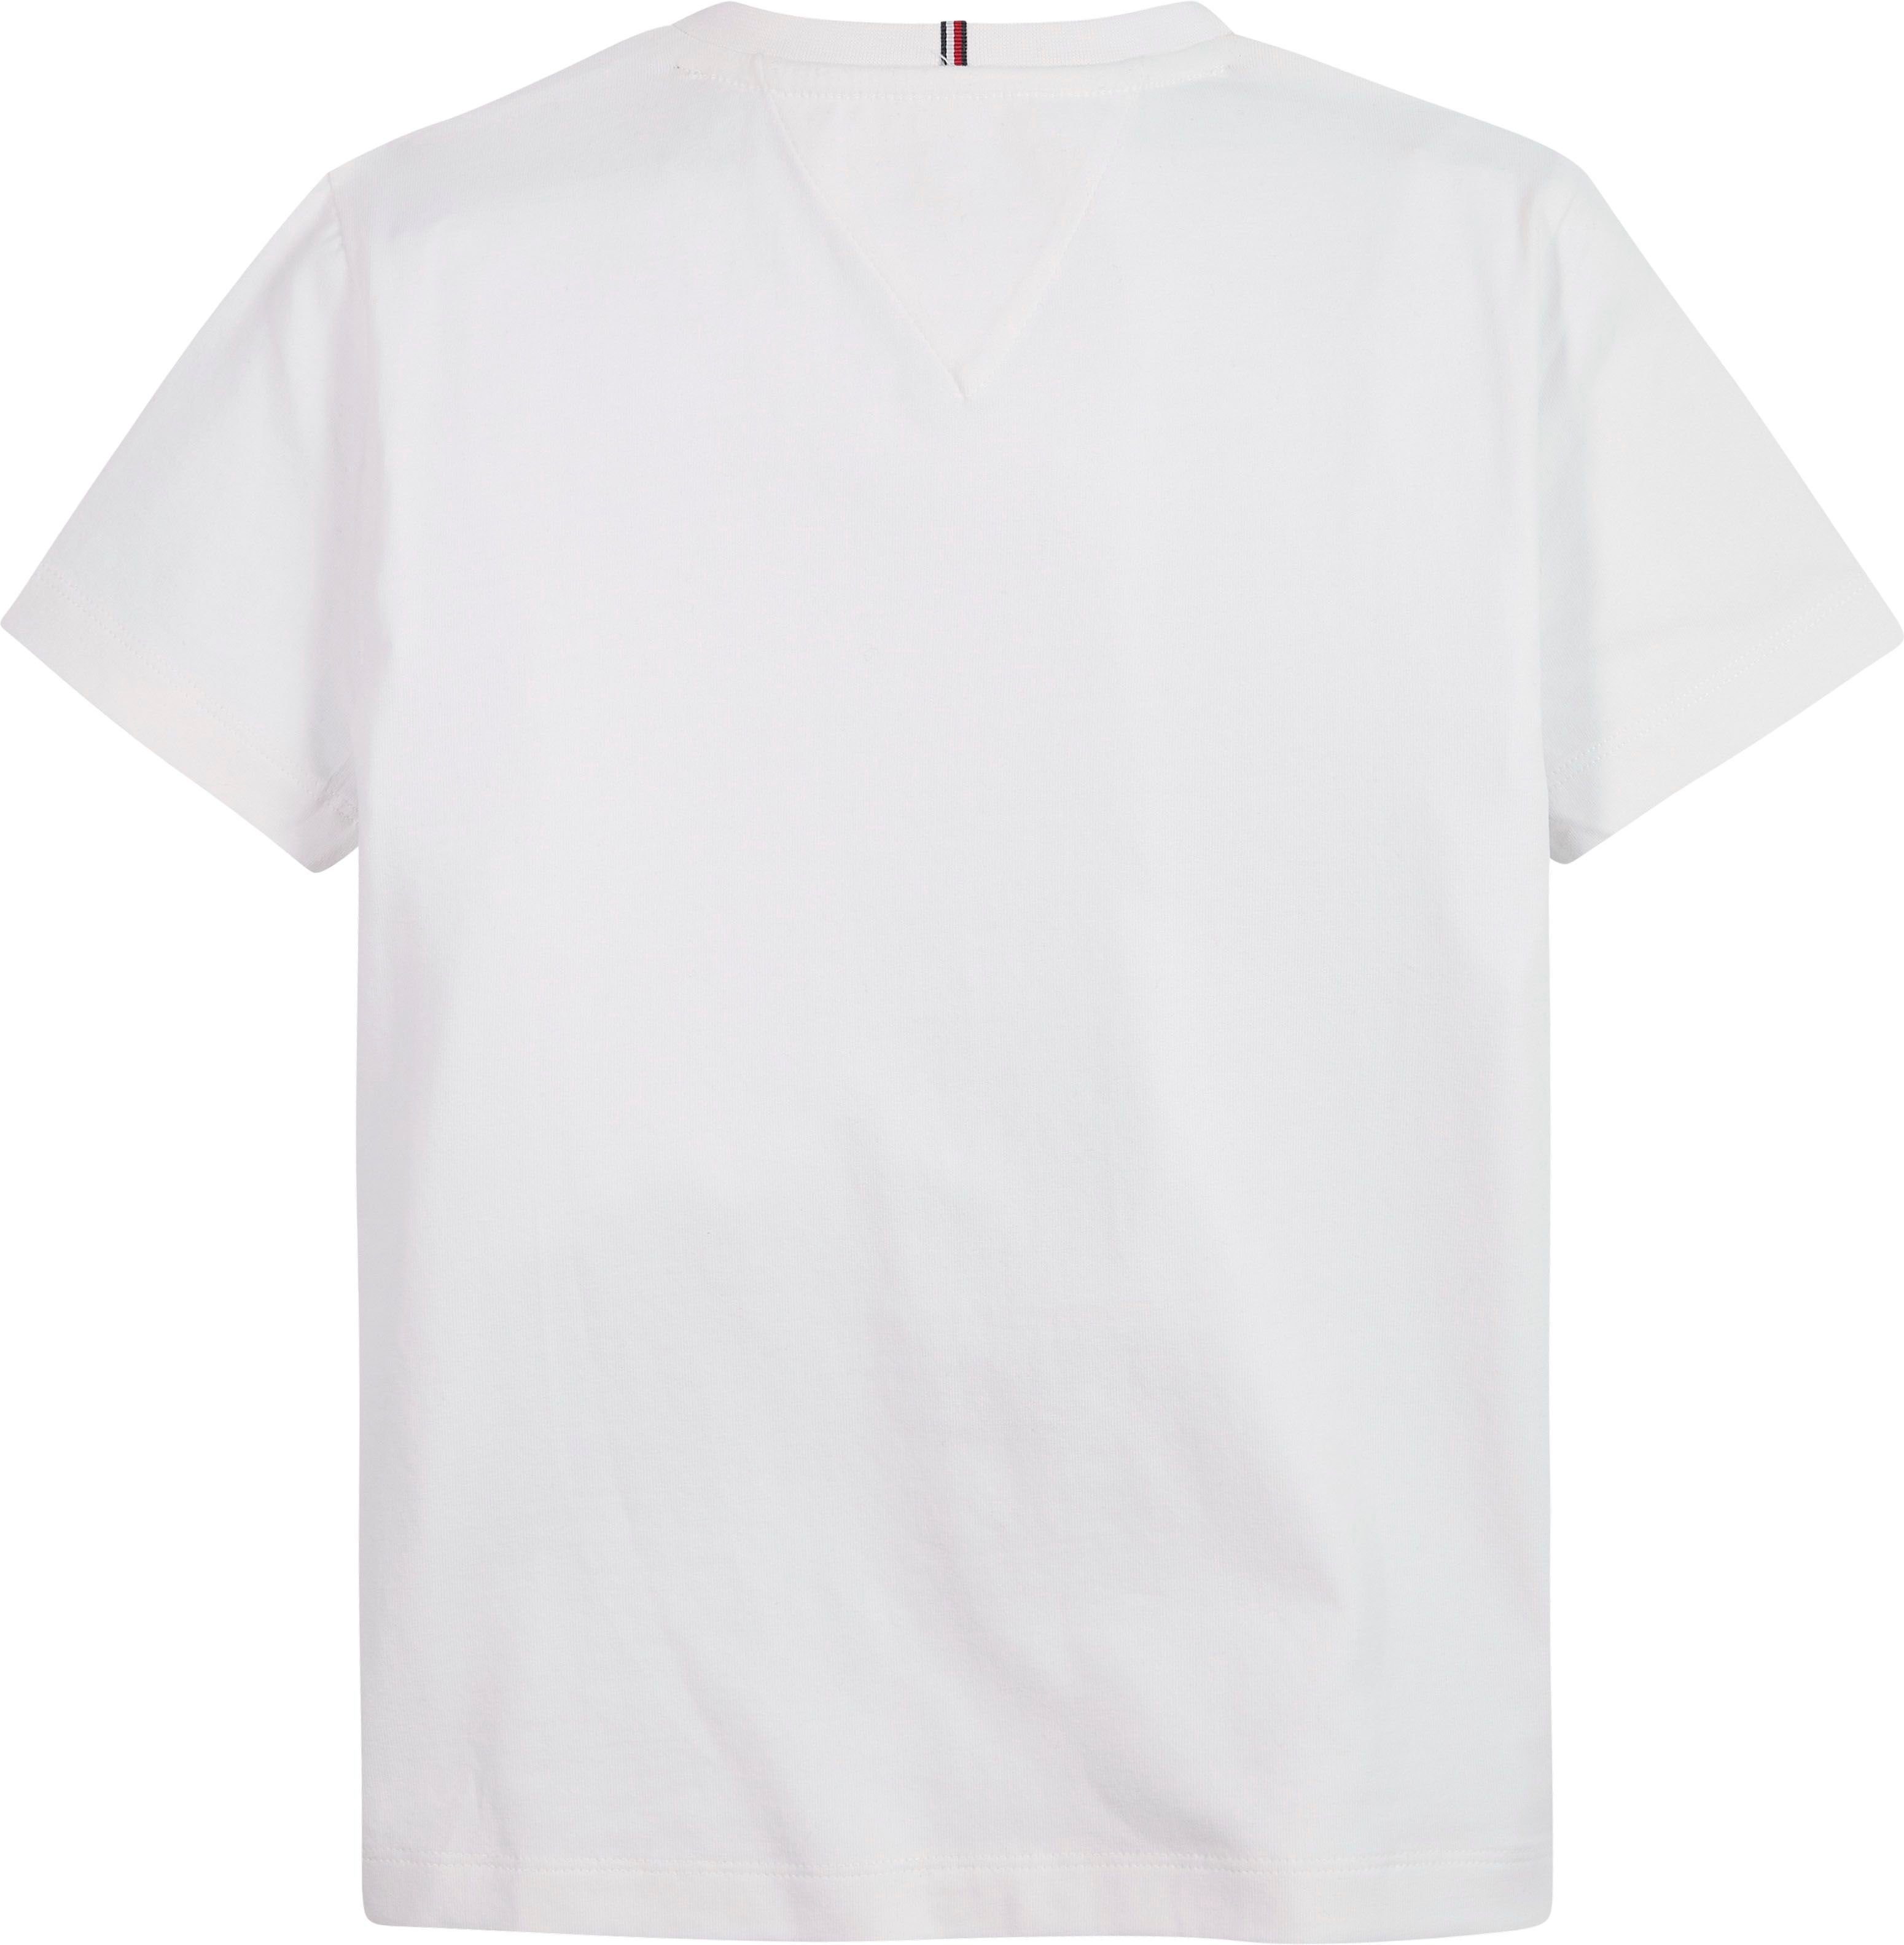 Tommy Hilfiger T-Shirt TOMMY GRAPHIC White TEE S/S mit MULTI Logostickerei